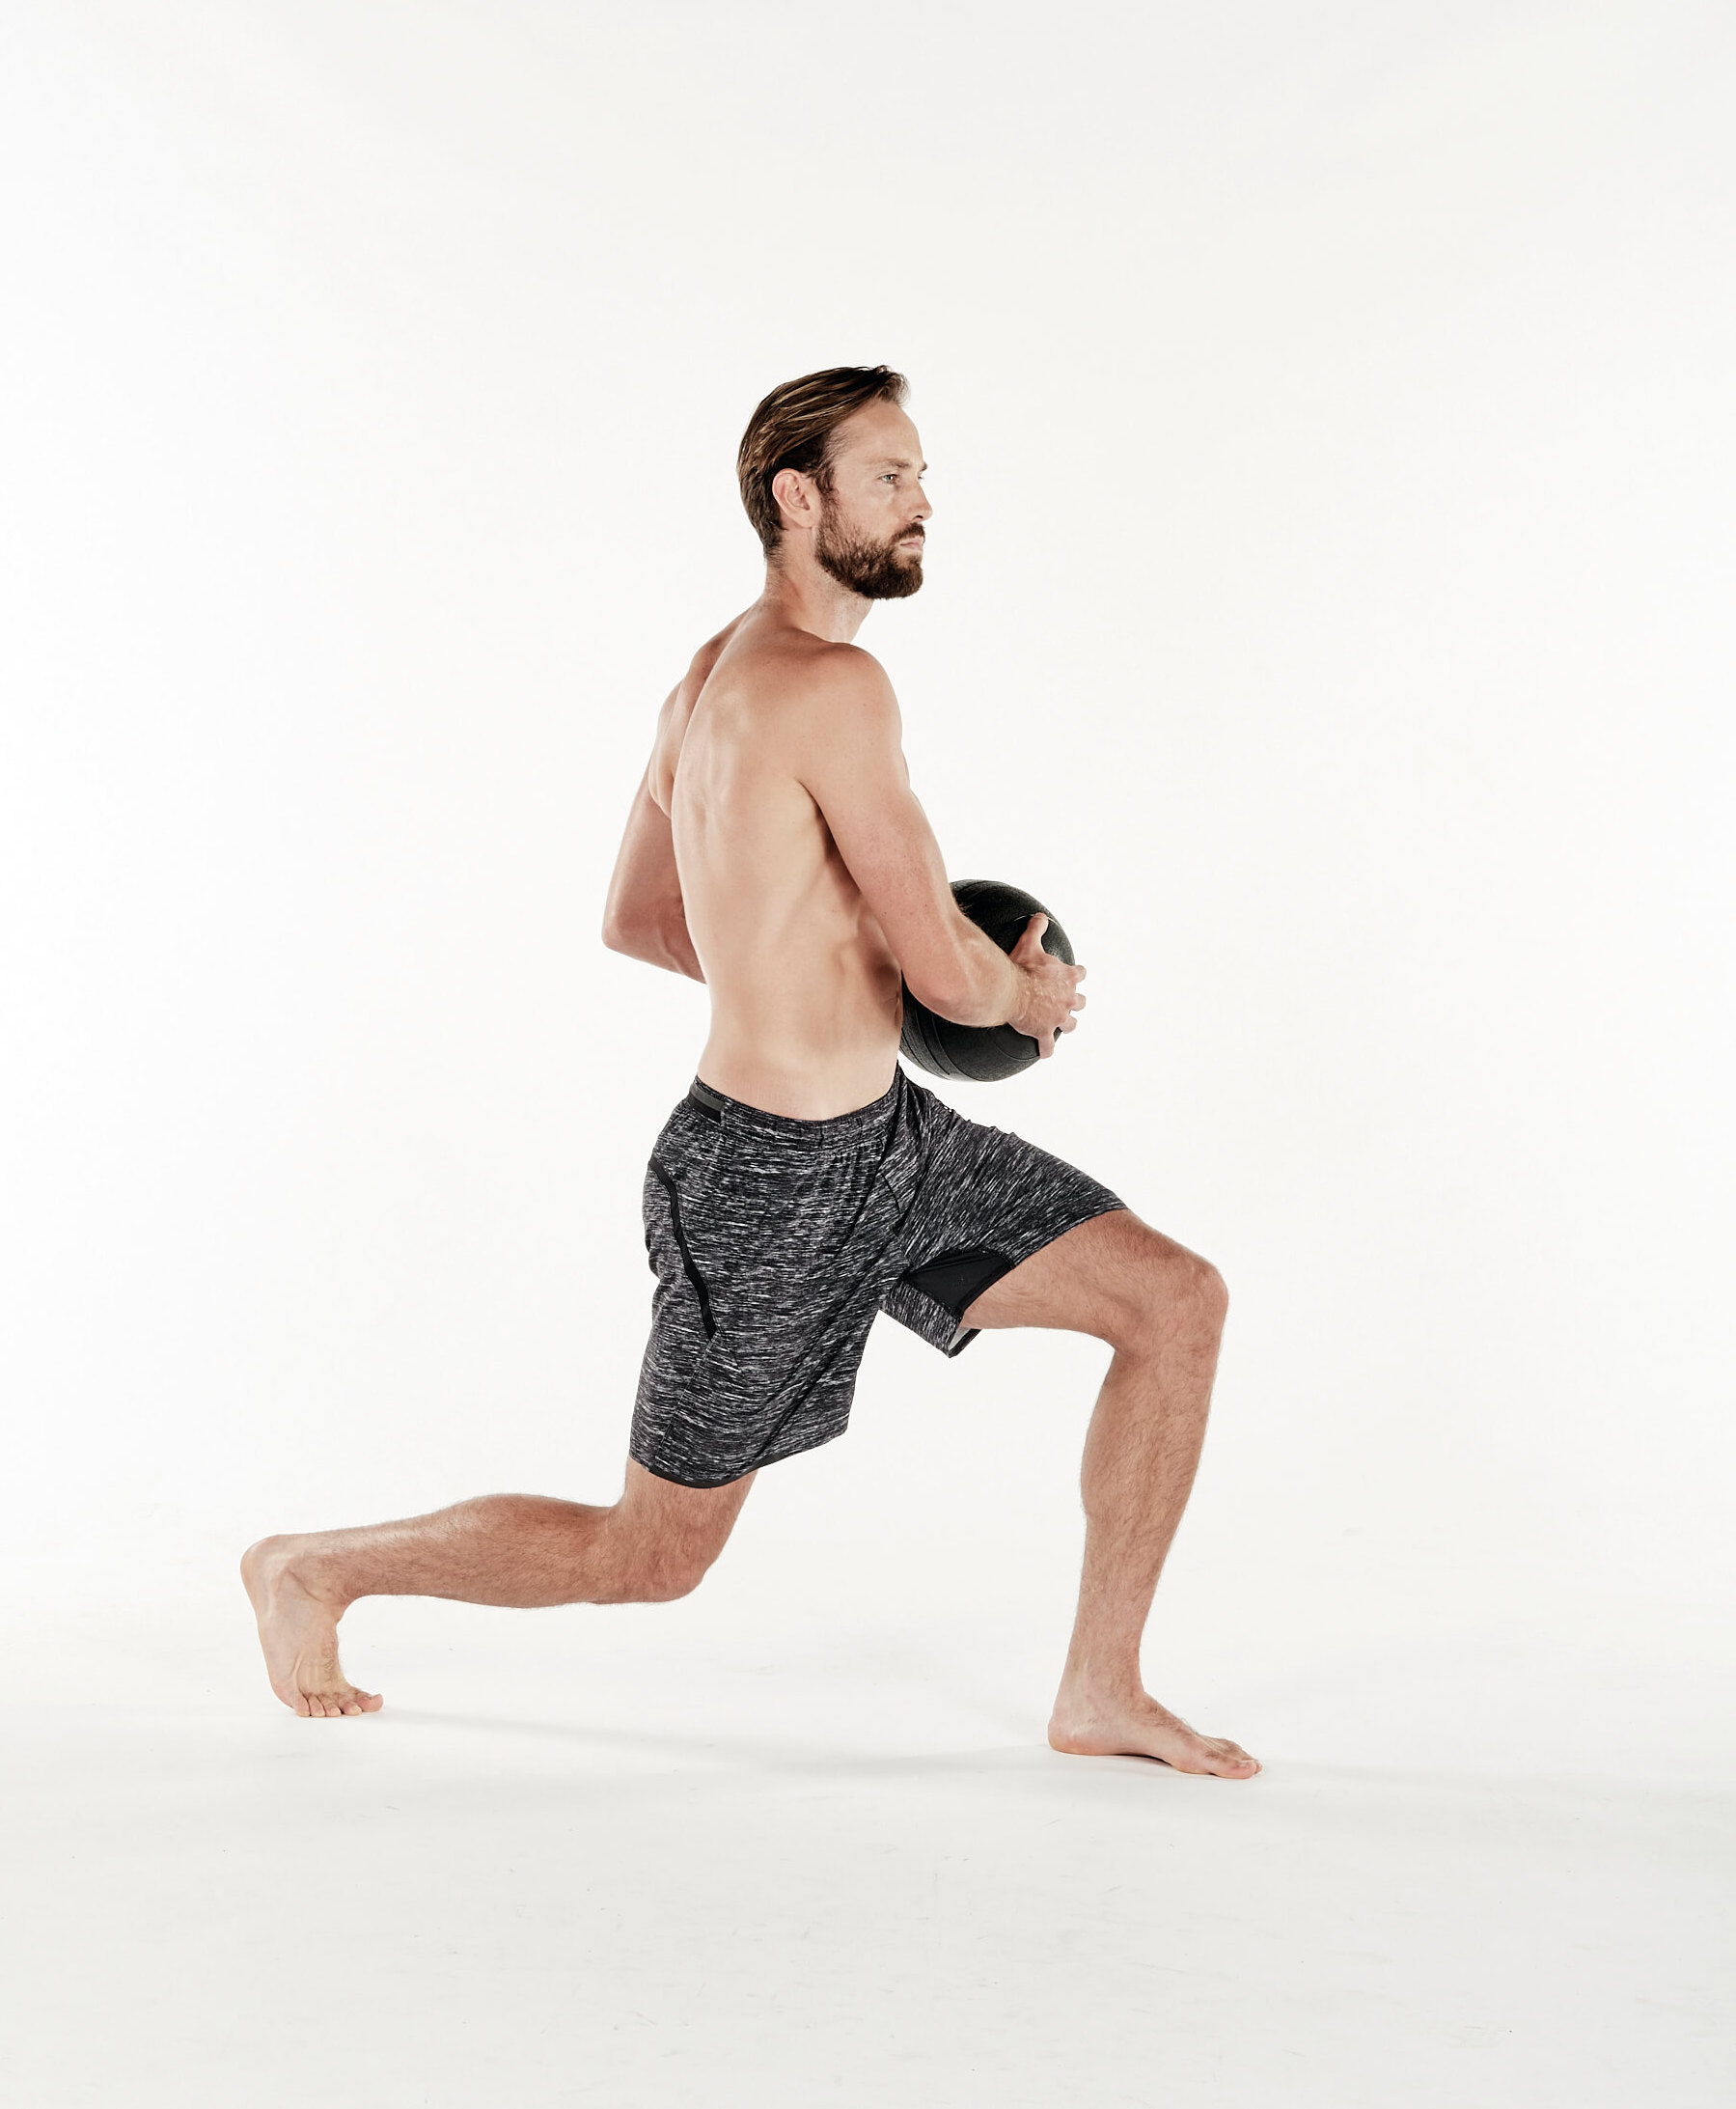 Find Full-Body Fitness With This Medicine Ball Workout | Men's Fitness UK